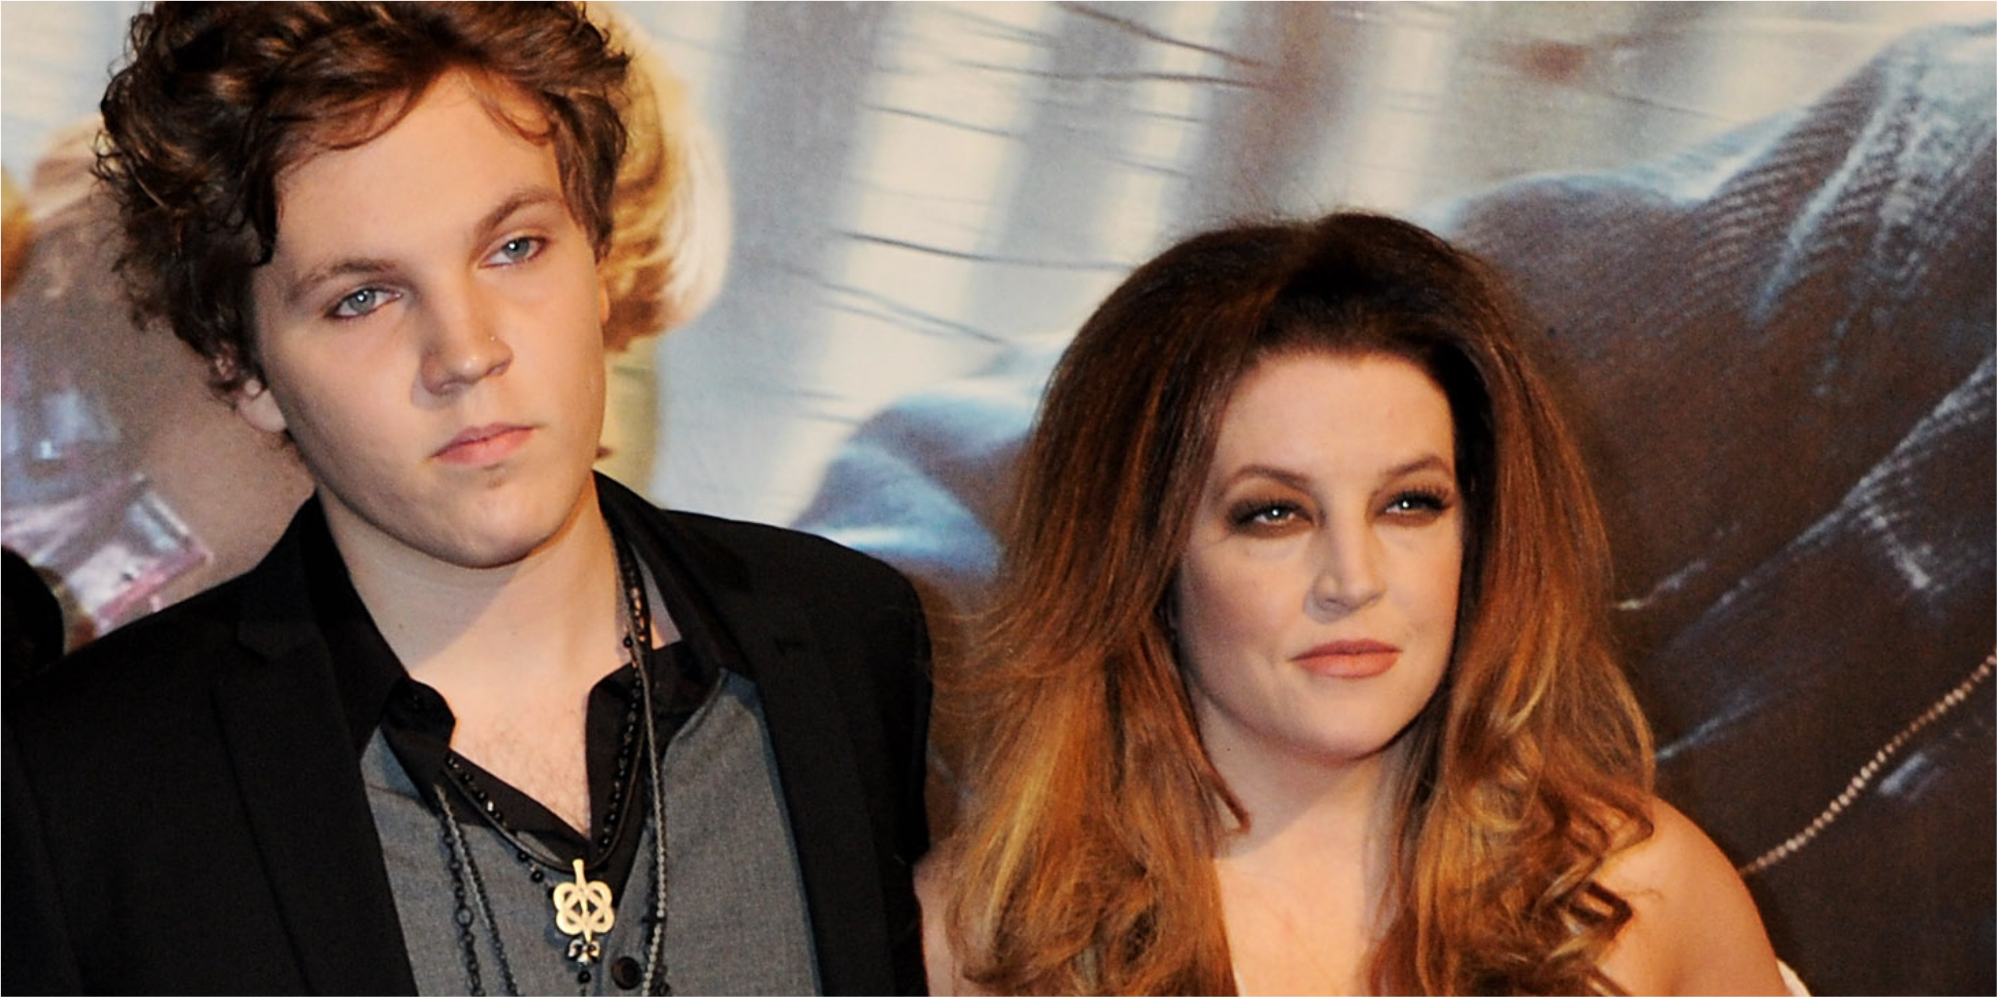 benjamin keough and lisa marie presley attend a 2010 press event.